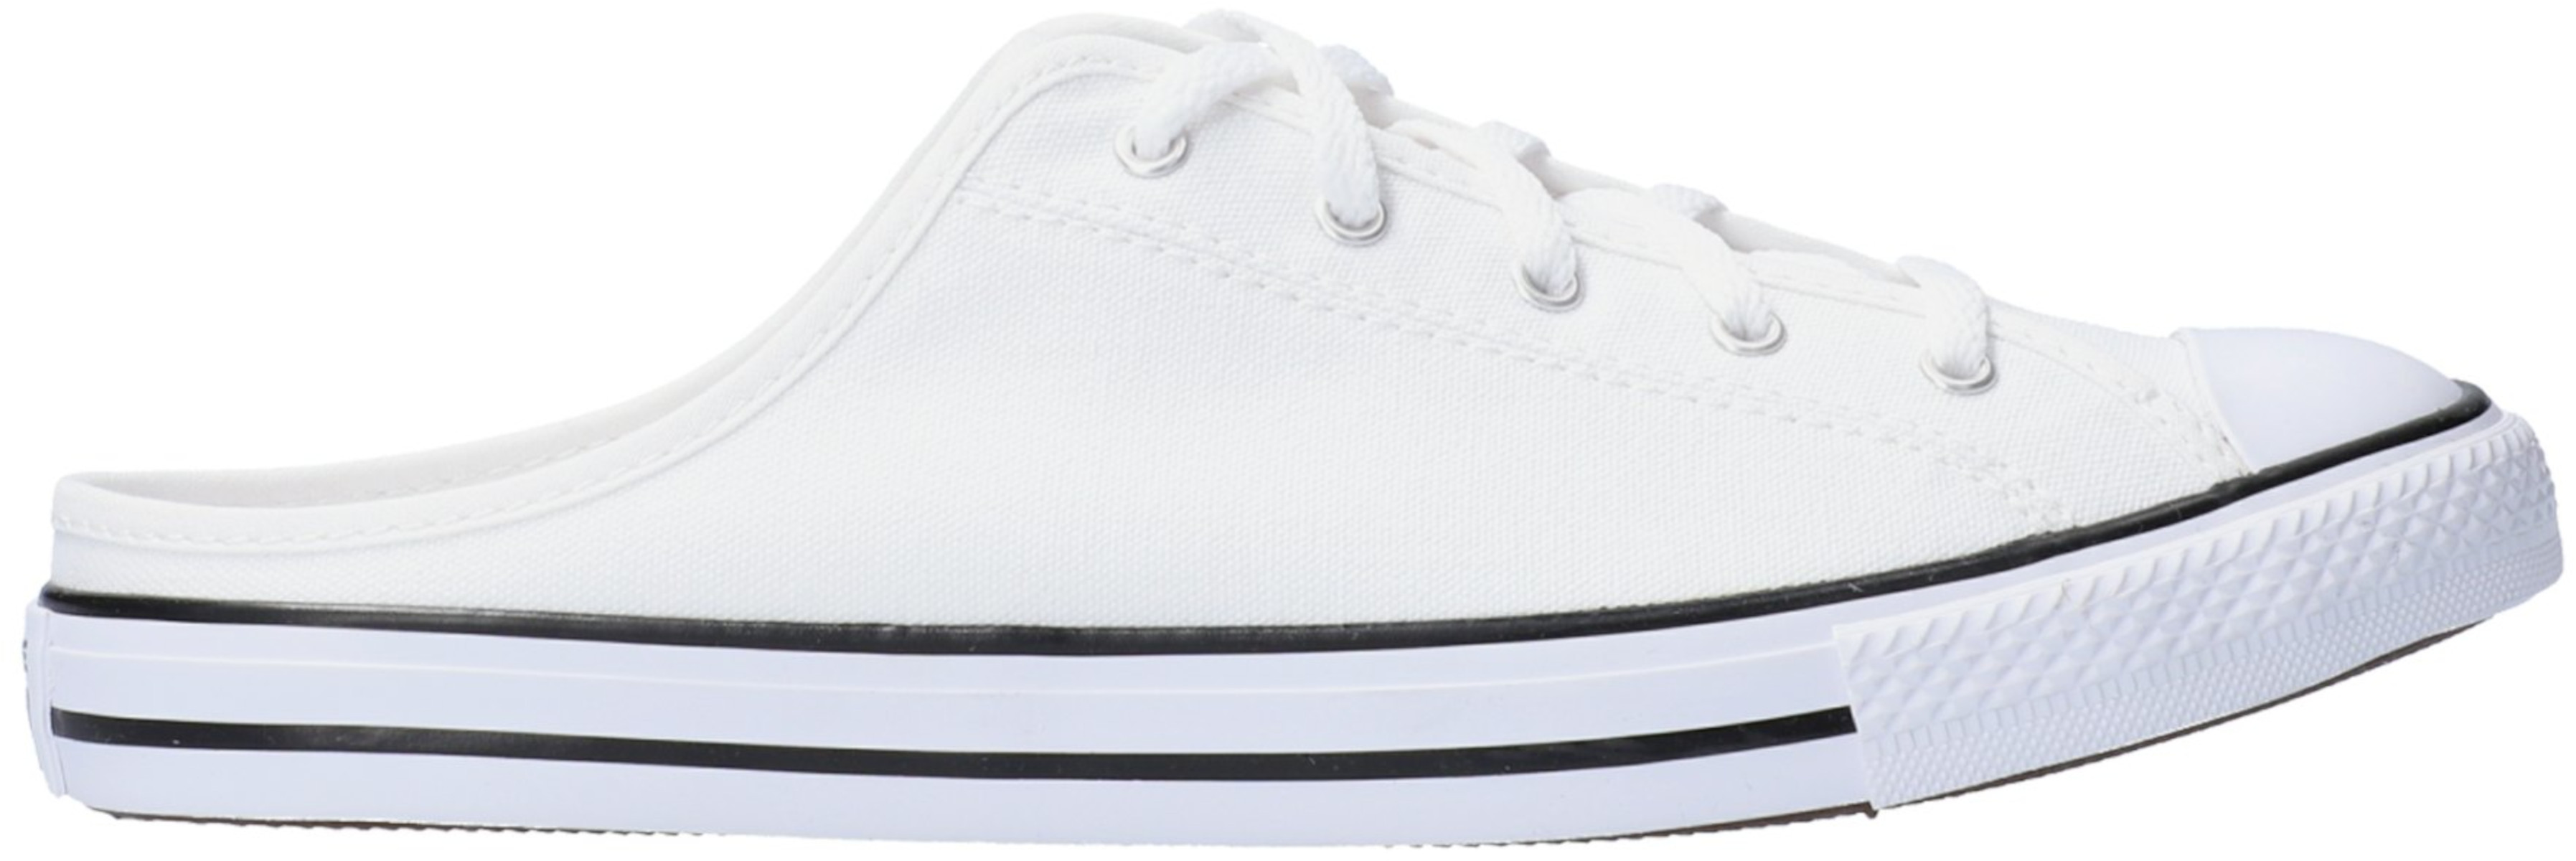 Chaussures Converse CTAS Dainty Mule Slip Weiss F102